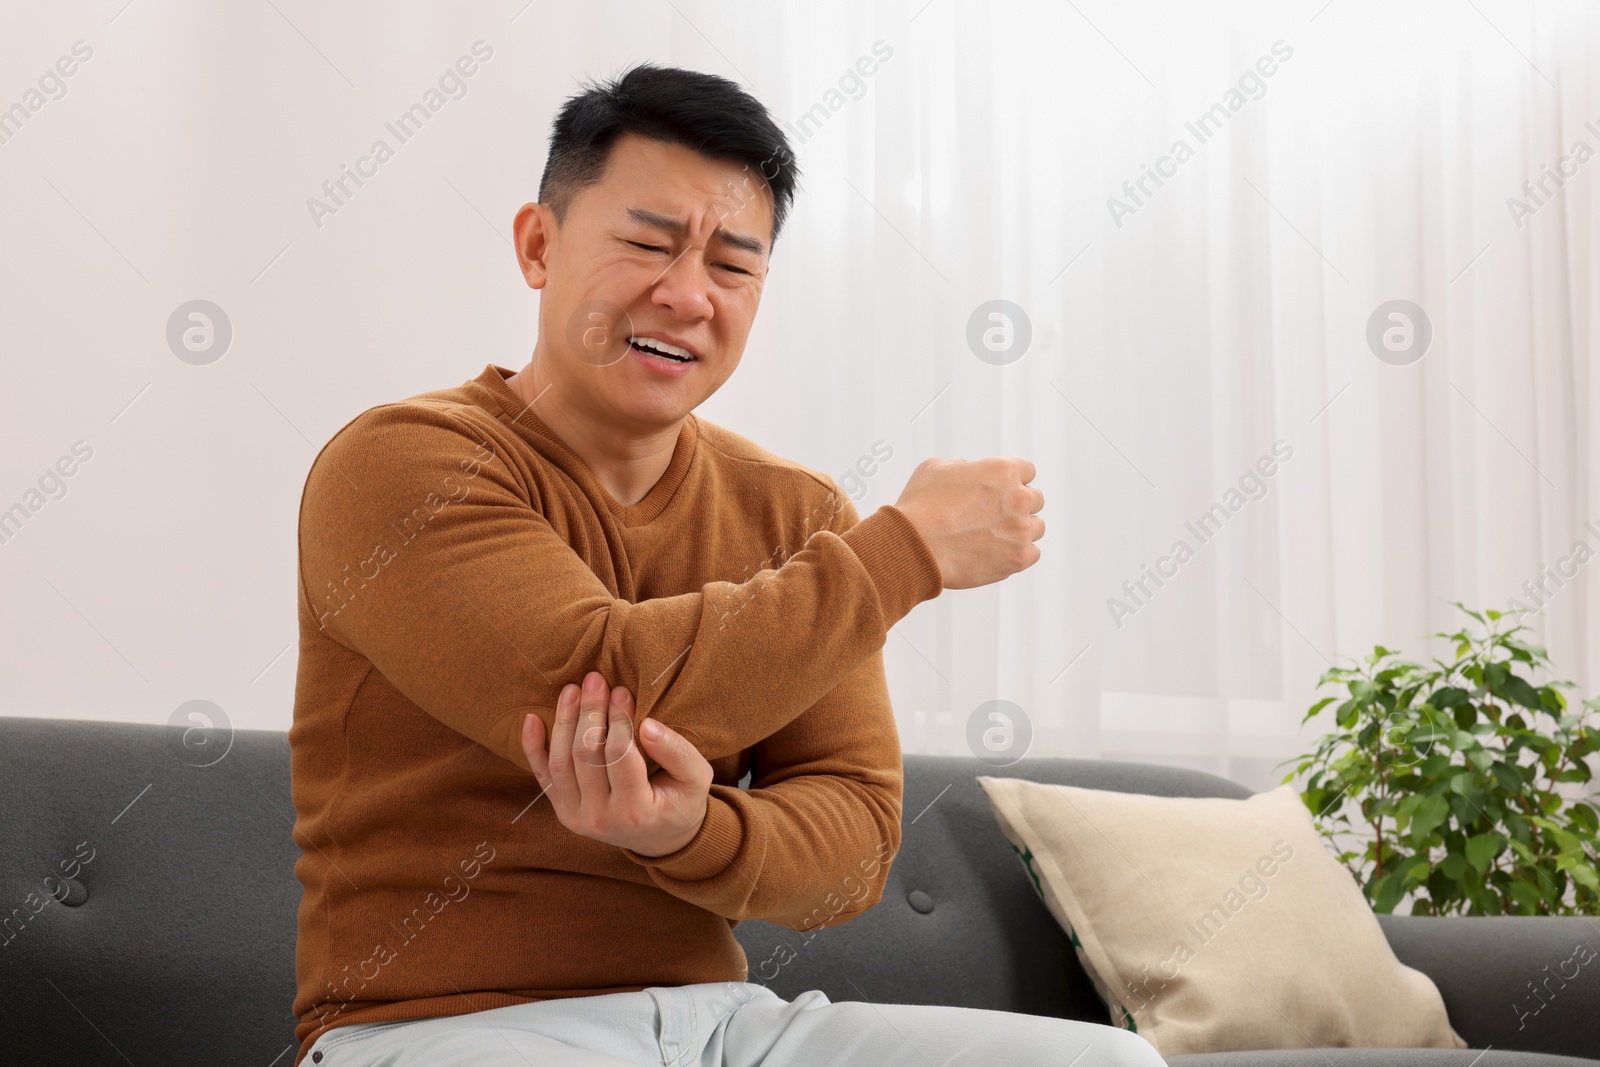 Photo of Asian man suffering from pain in his elbow on sofa indoors